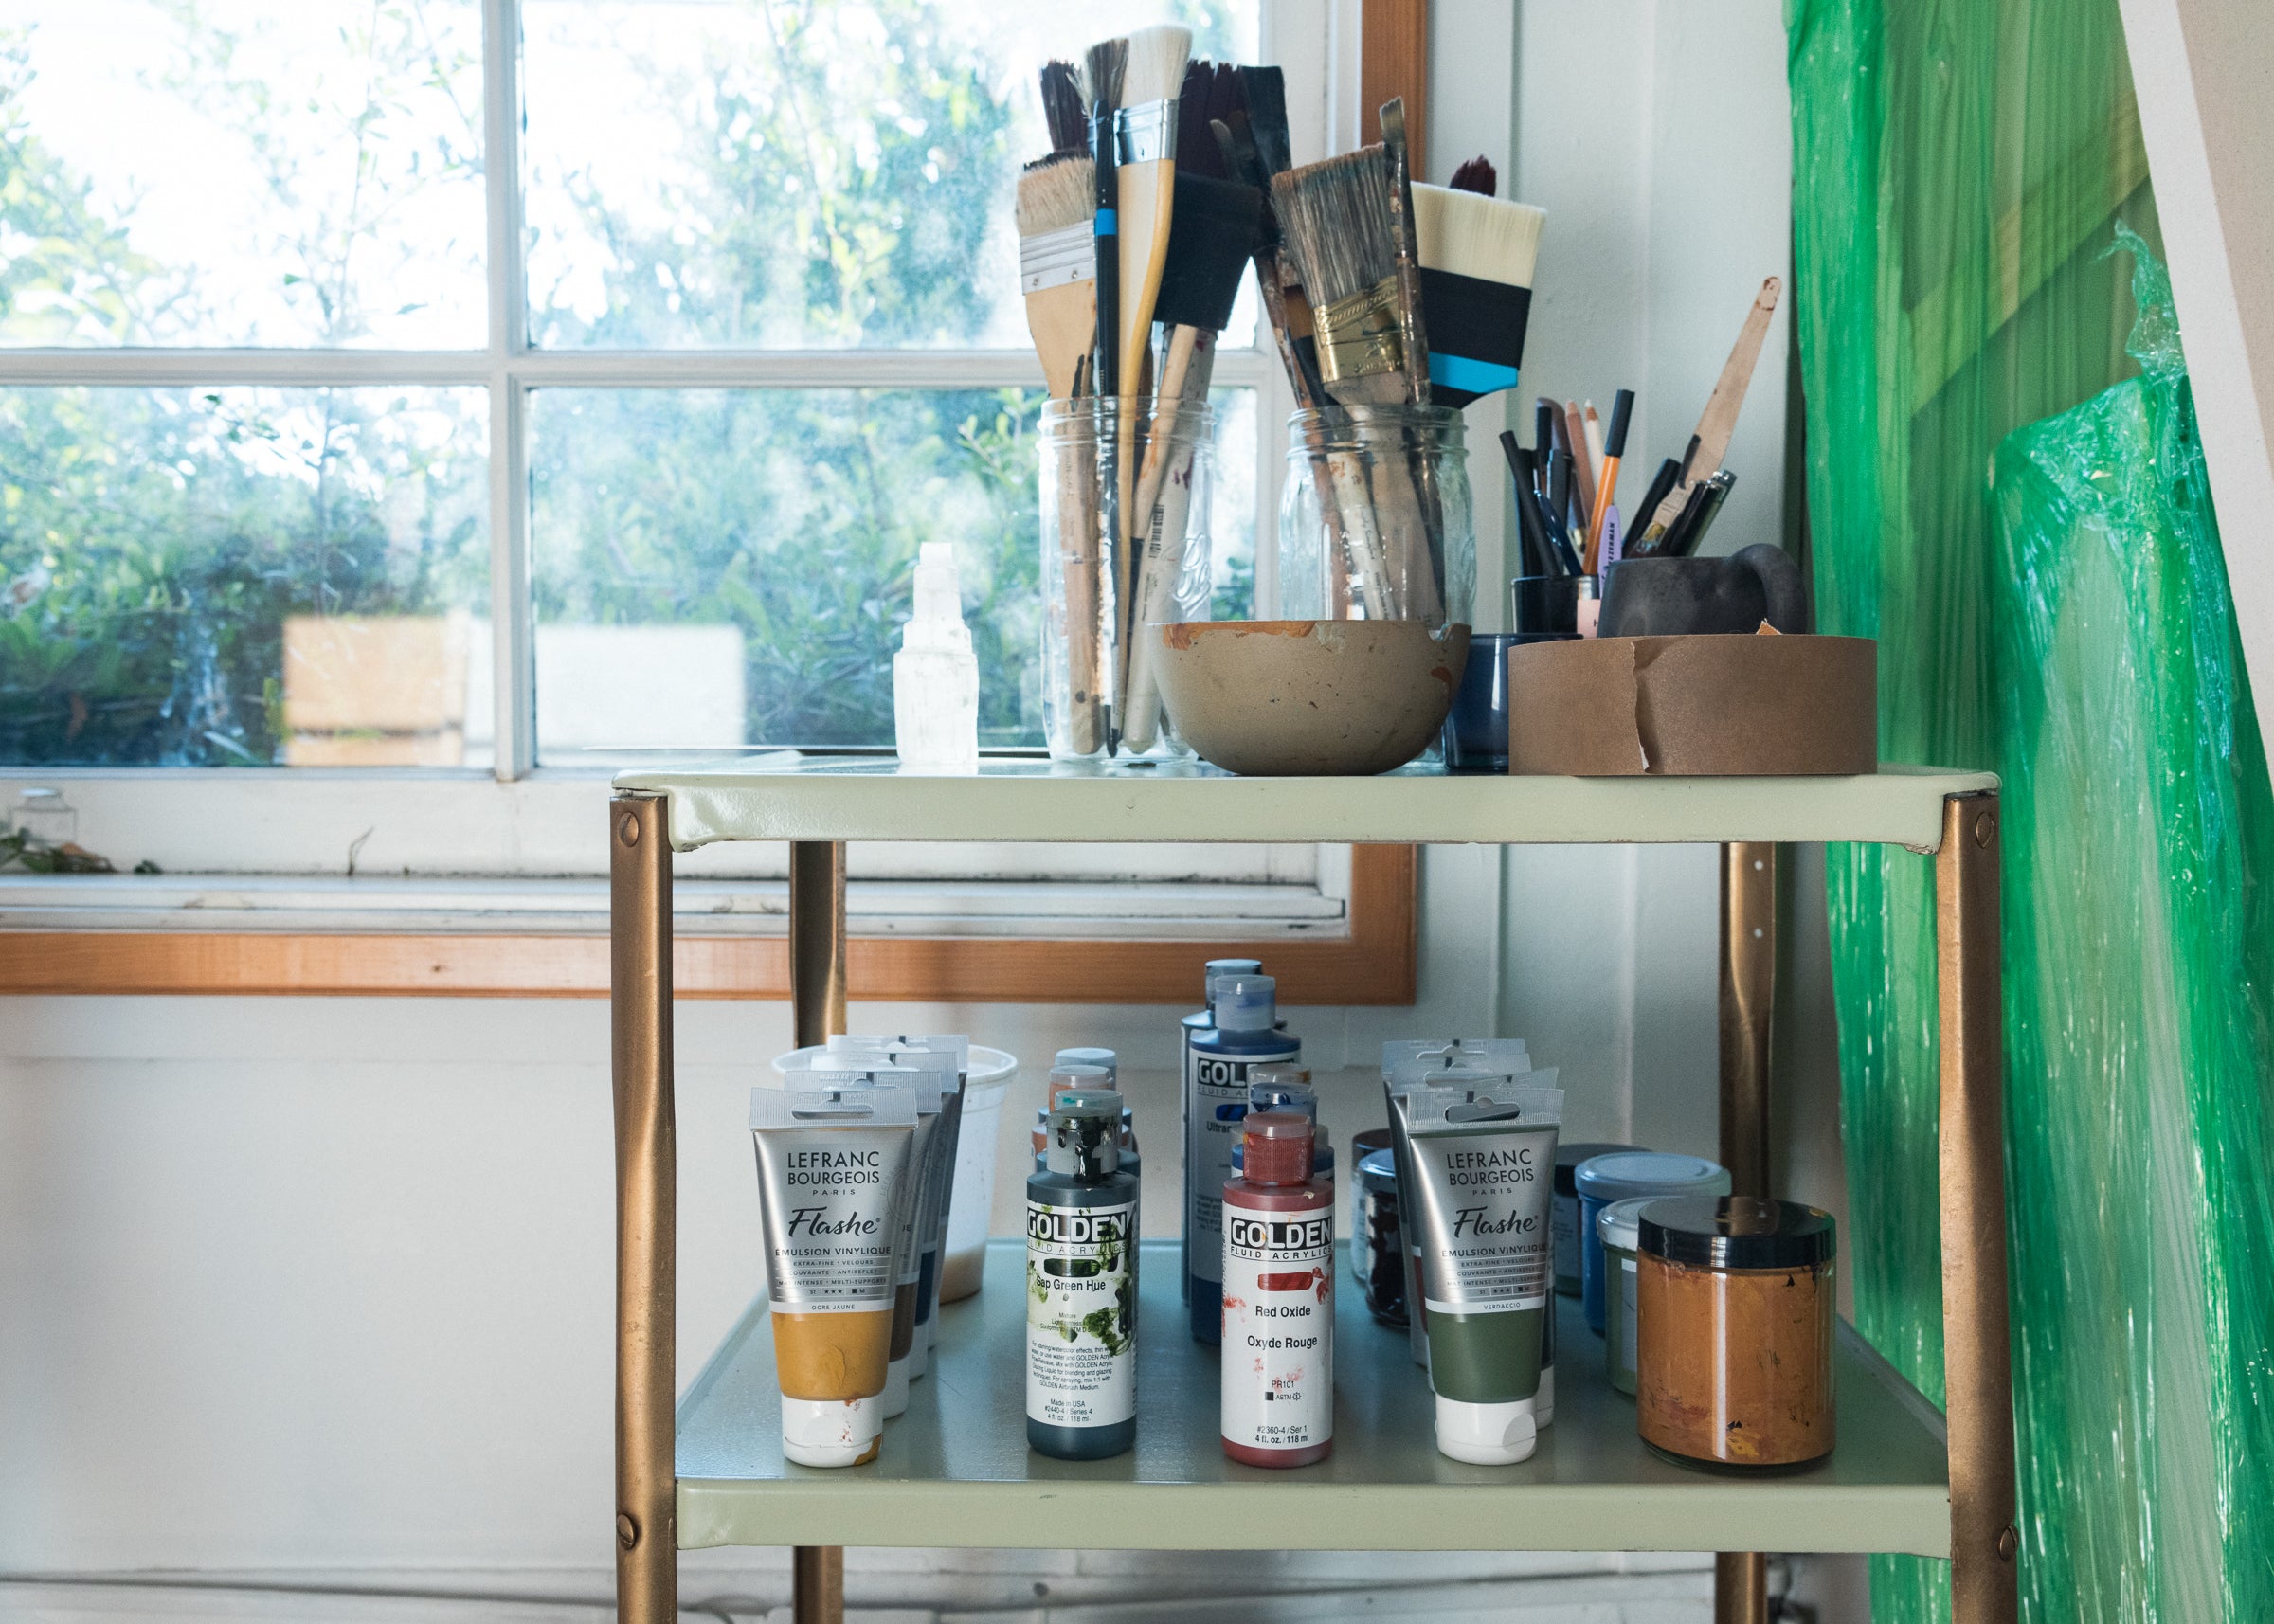 At Home with Artists: Michelle + Duncan